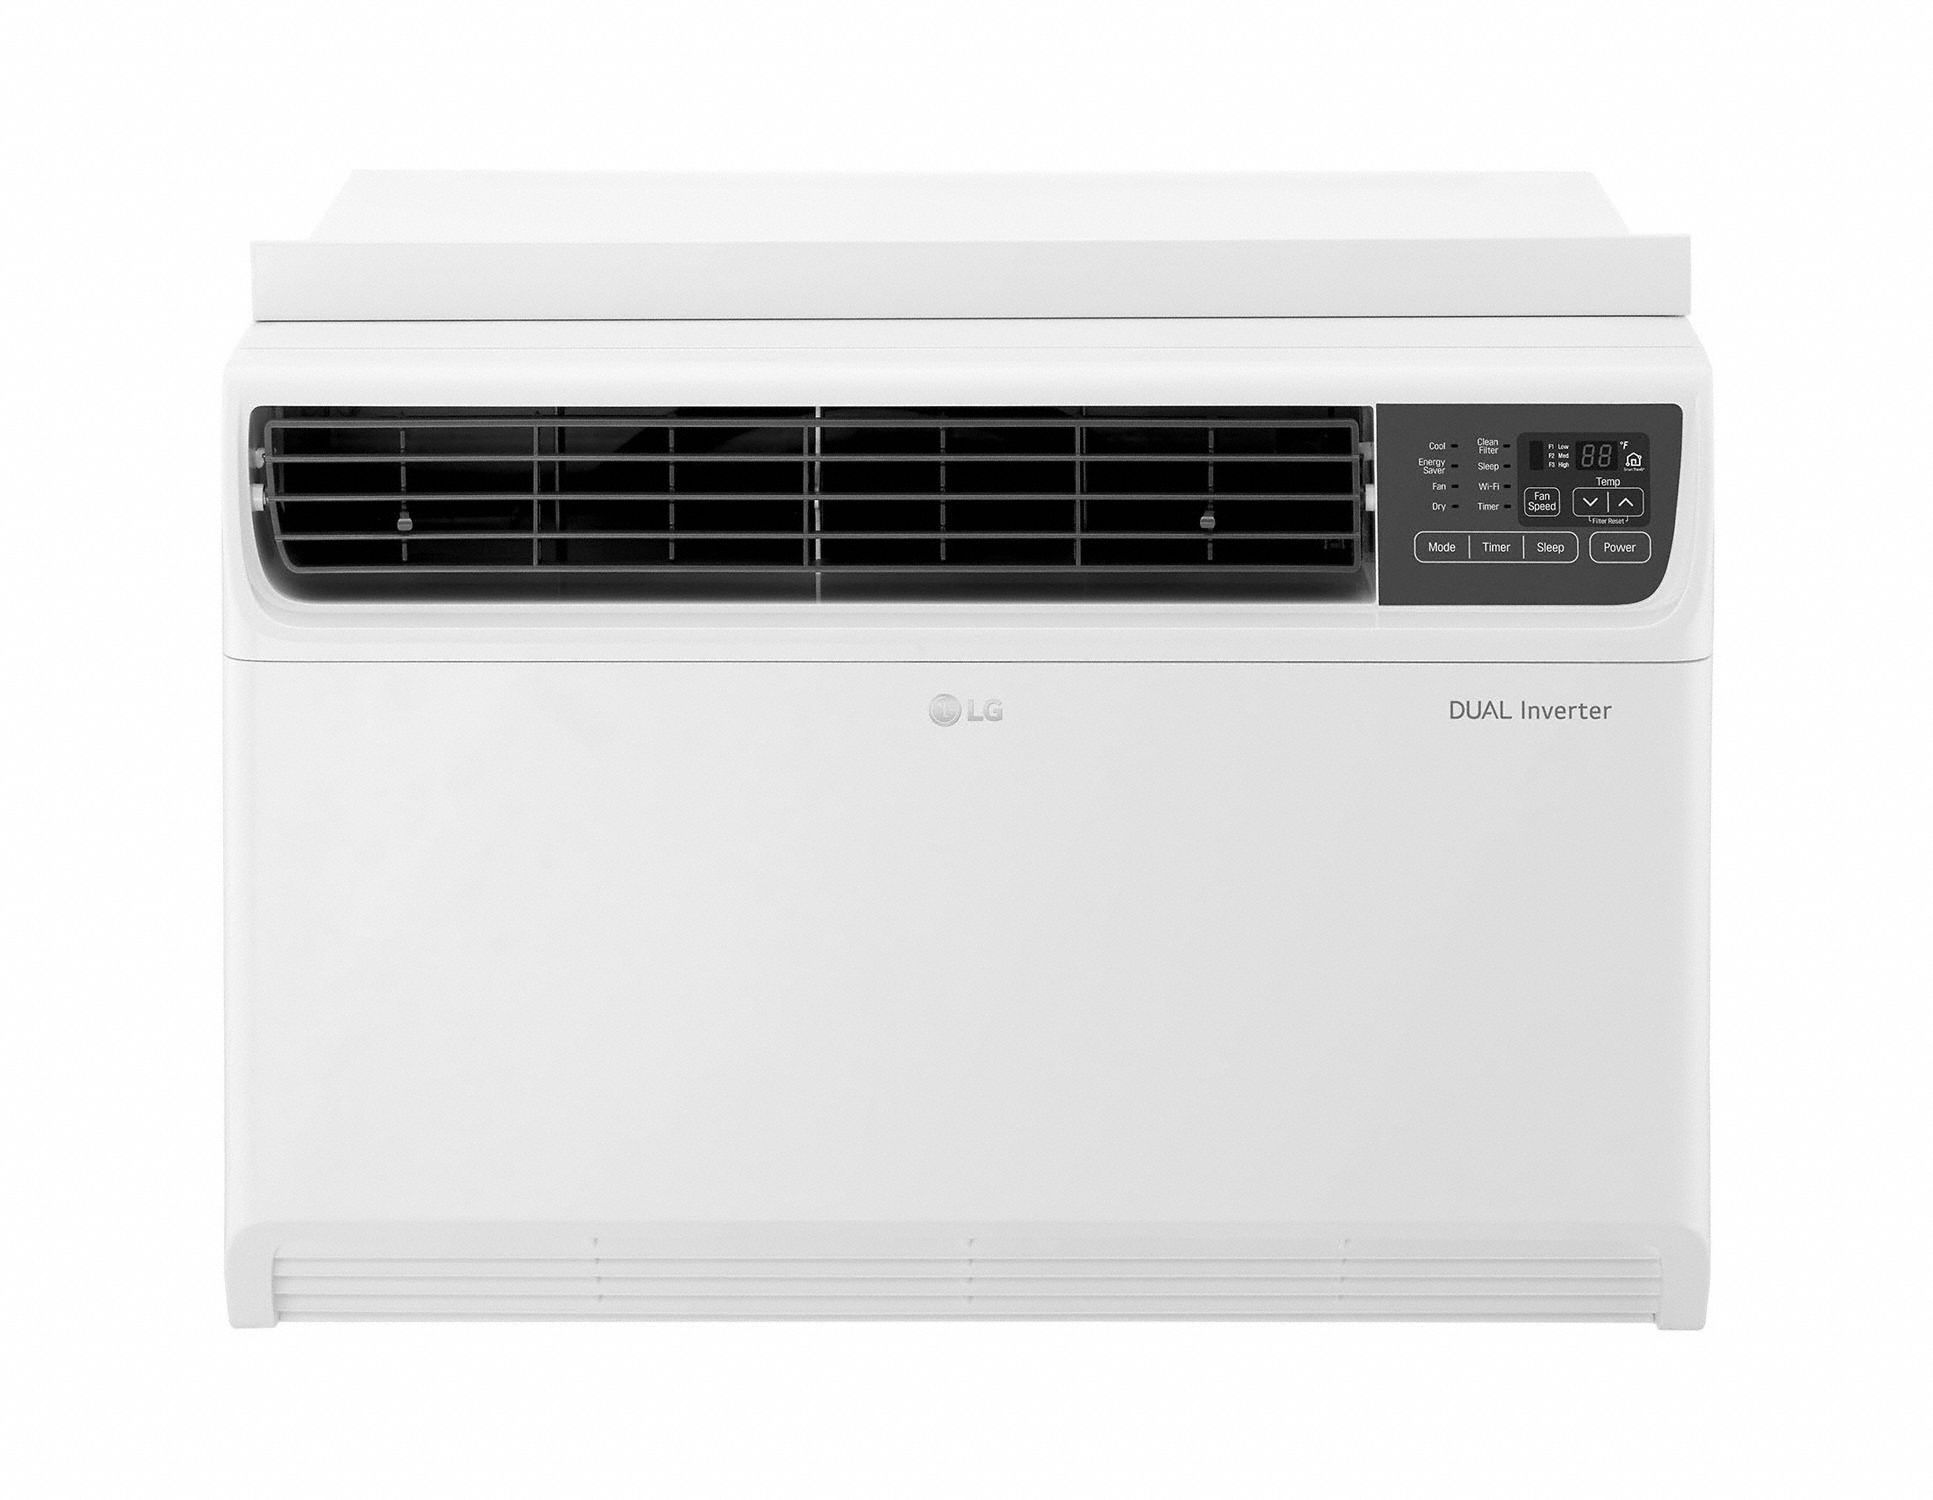 Window Air Conditioner: 14,000 BtuH, 550 to 700 sq ft